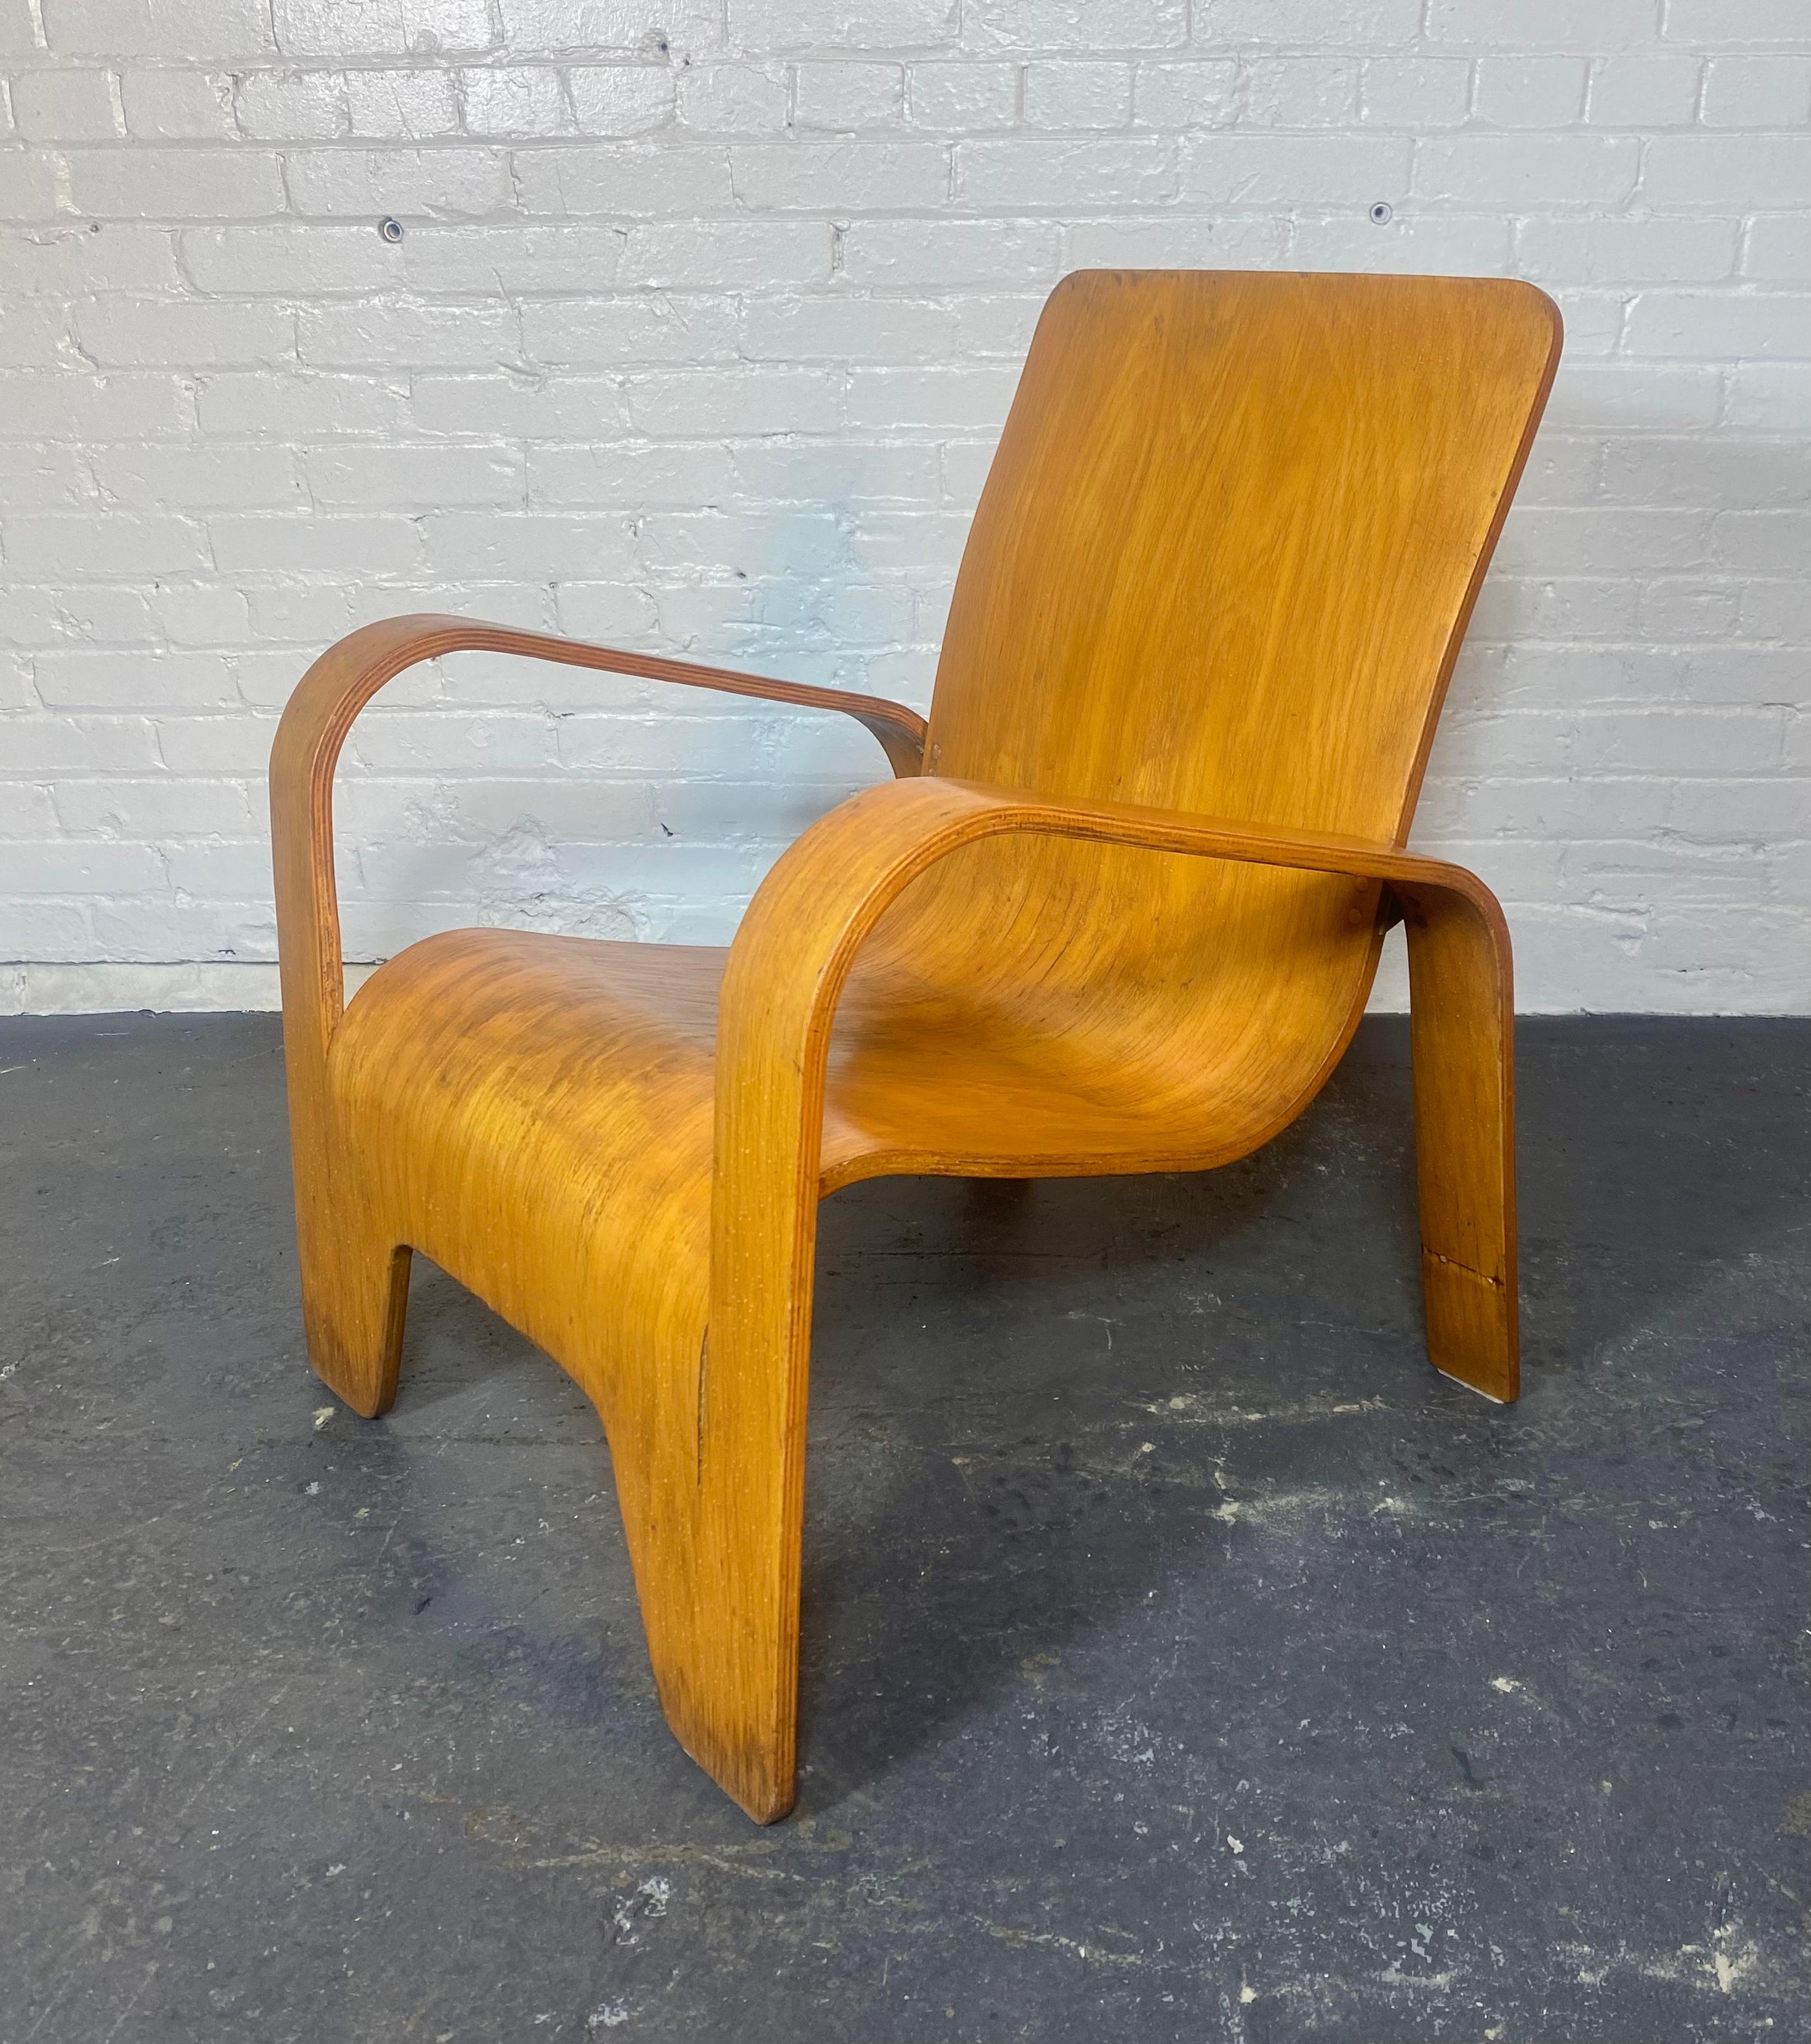 Rare LaWo1 Wooden Lounge Chair by Han Pieck for Lawo Ommen, The Netherlands. This rare dutch modern chair is brilliantly designed and made from several layers of birch plywood. The back legs are fixed to the seat back by brass brackets, button